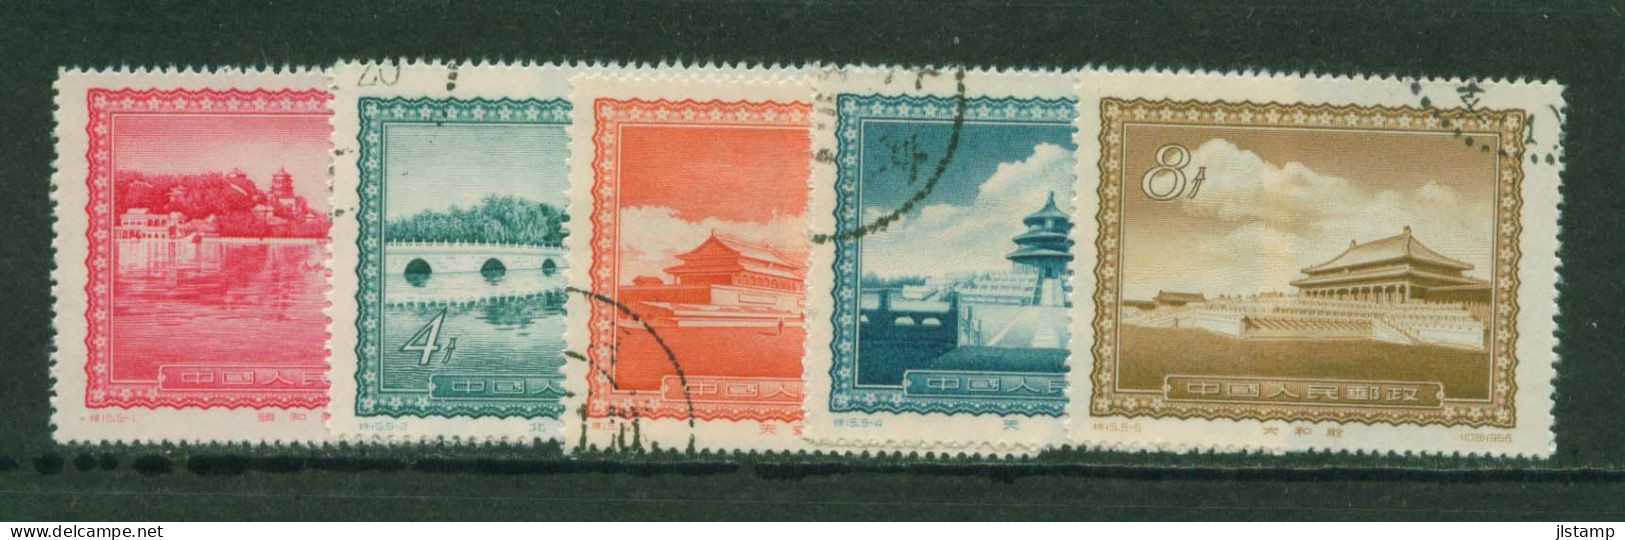 China 1956 Famous Views Of Peijng, CTO Set Of 5 Stamps,Scott #290-294,VF - Used Stamps